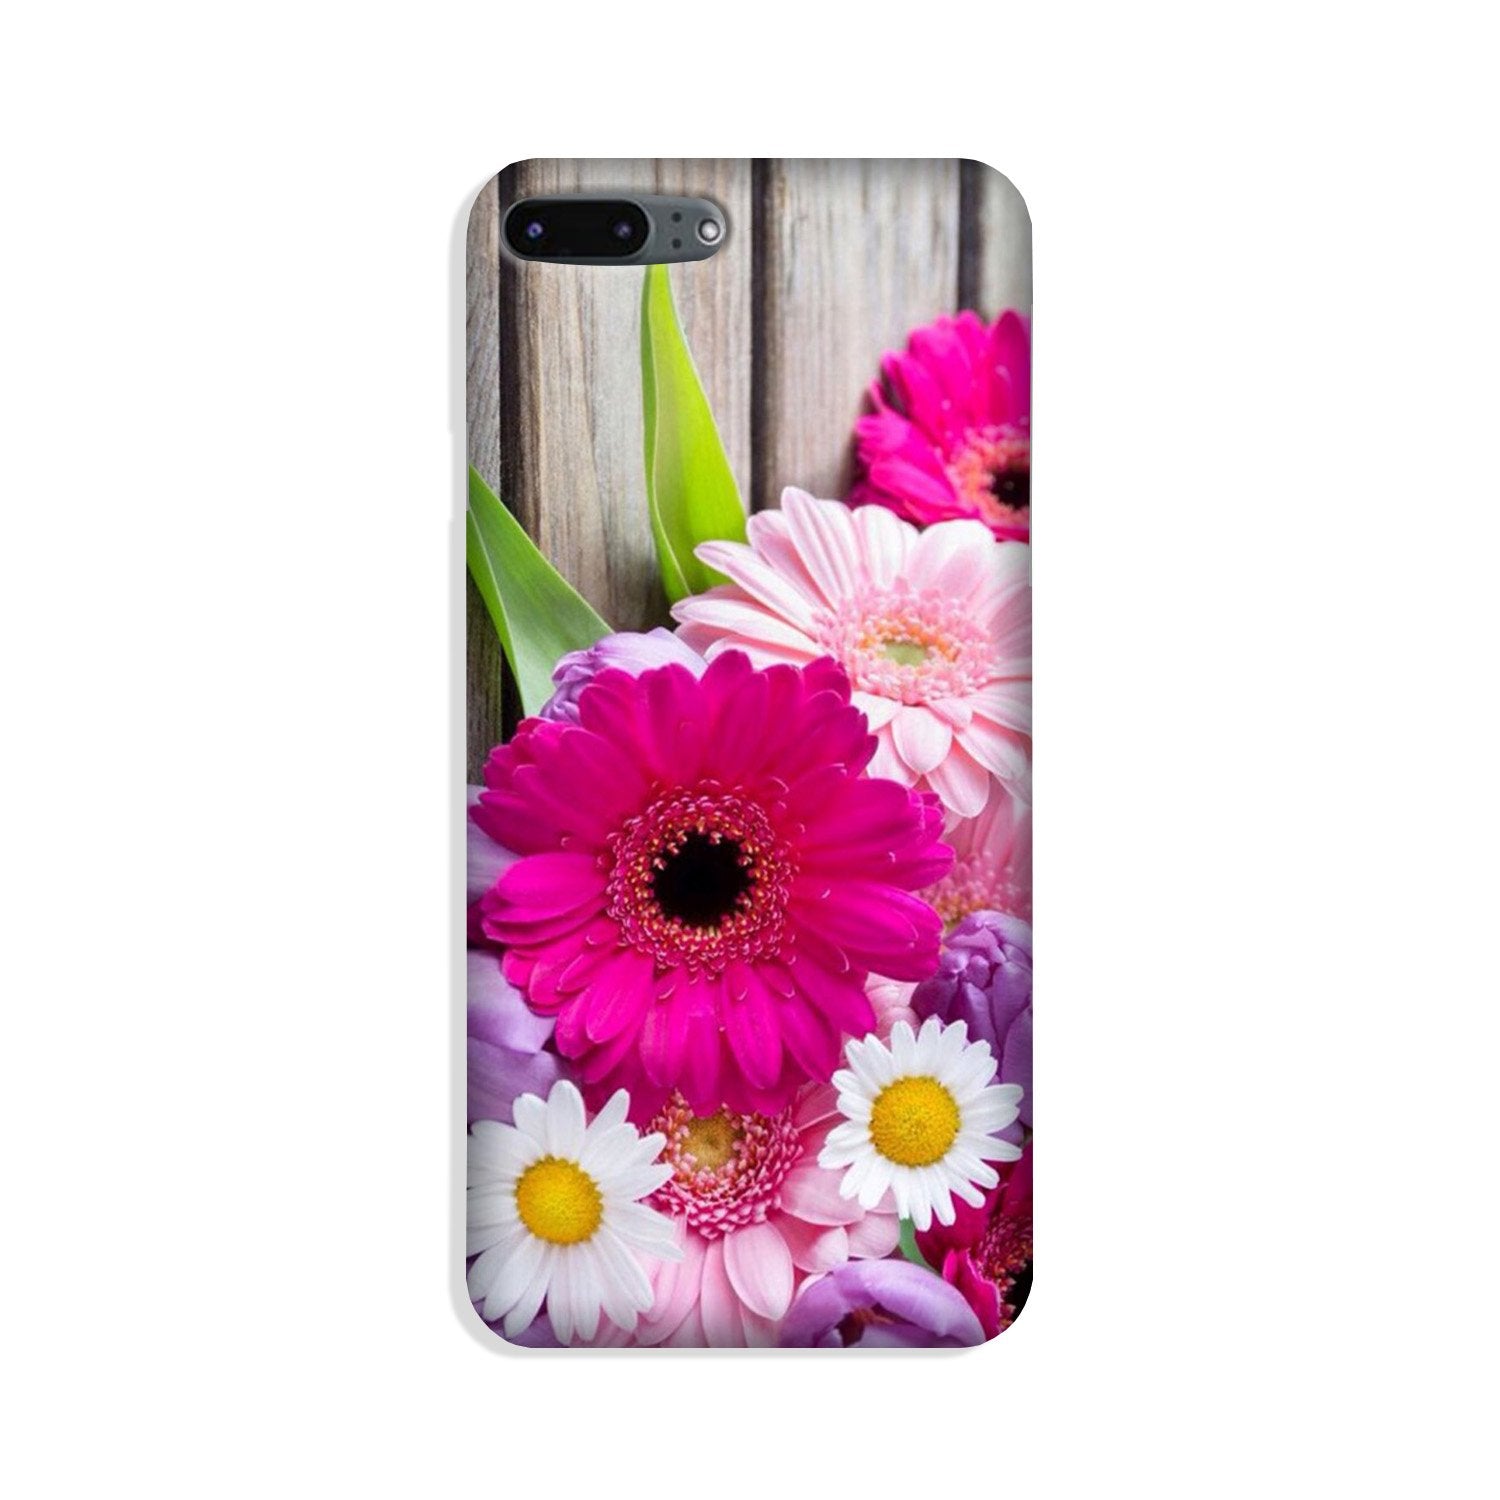 Coloful Daisy2 Case for iPhone 8 Plus